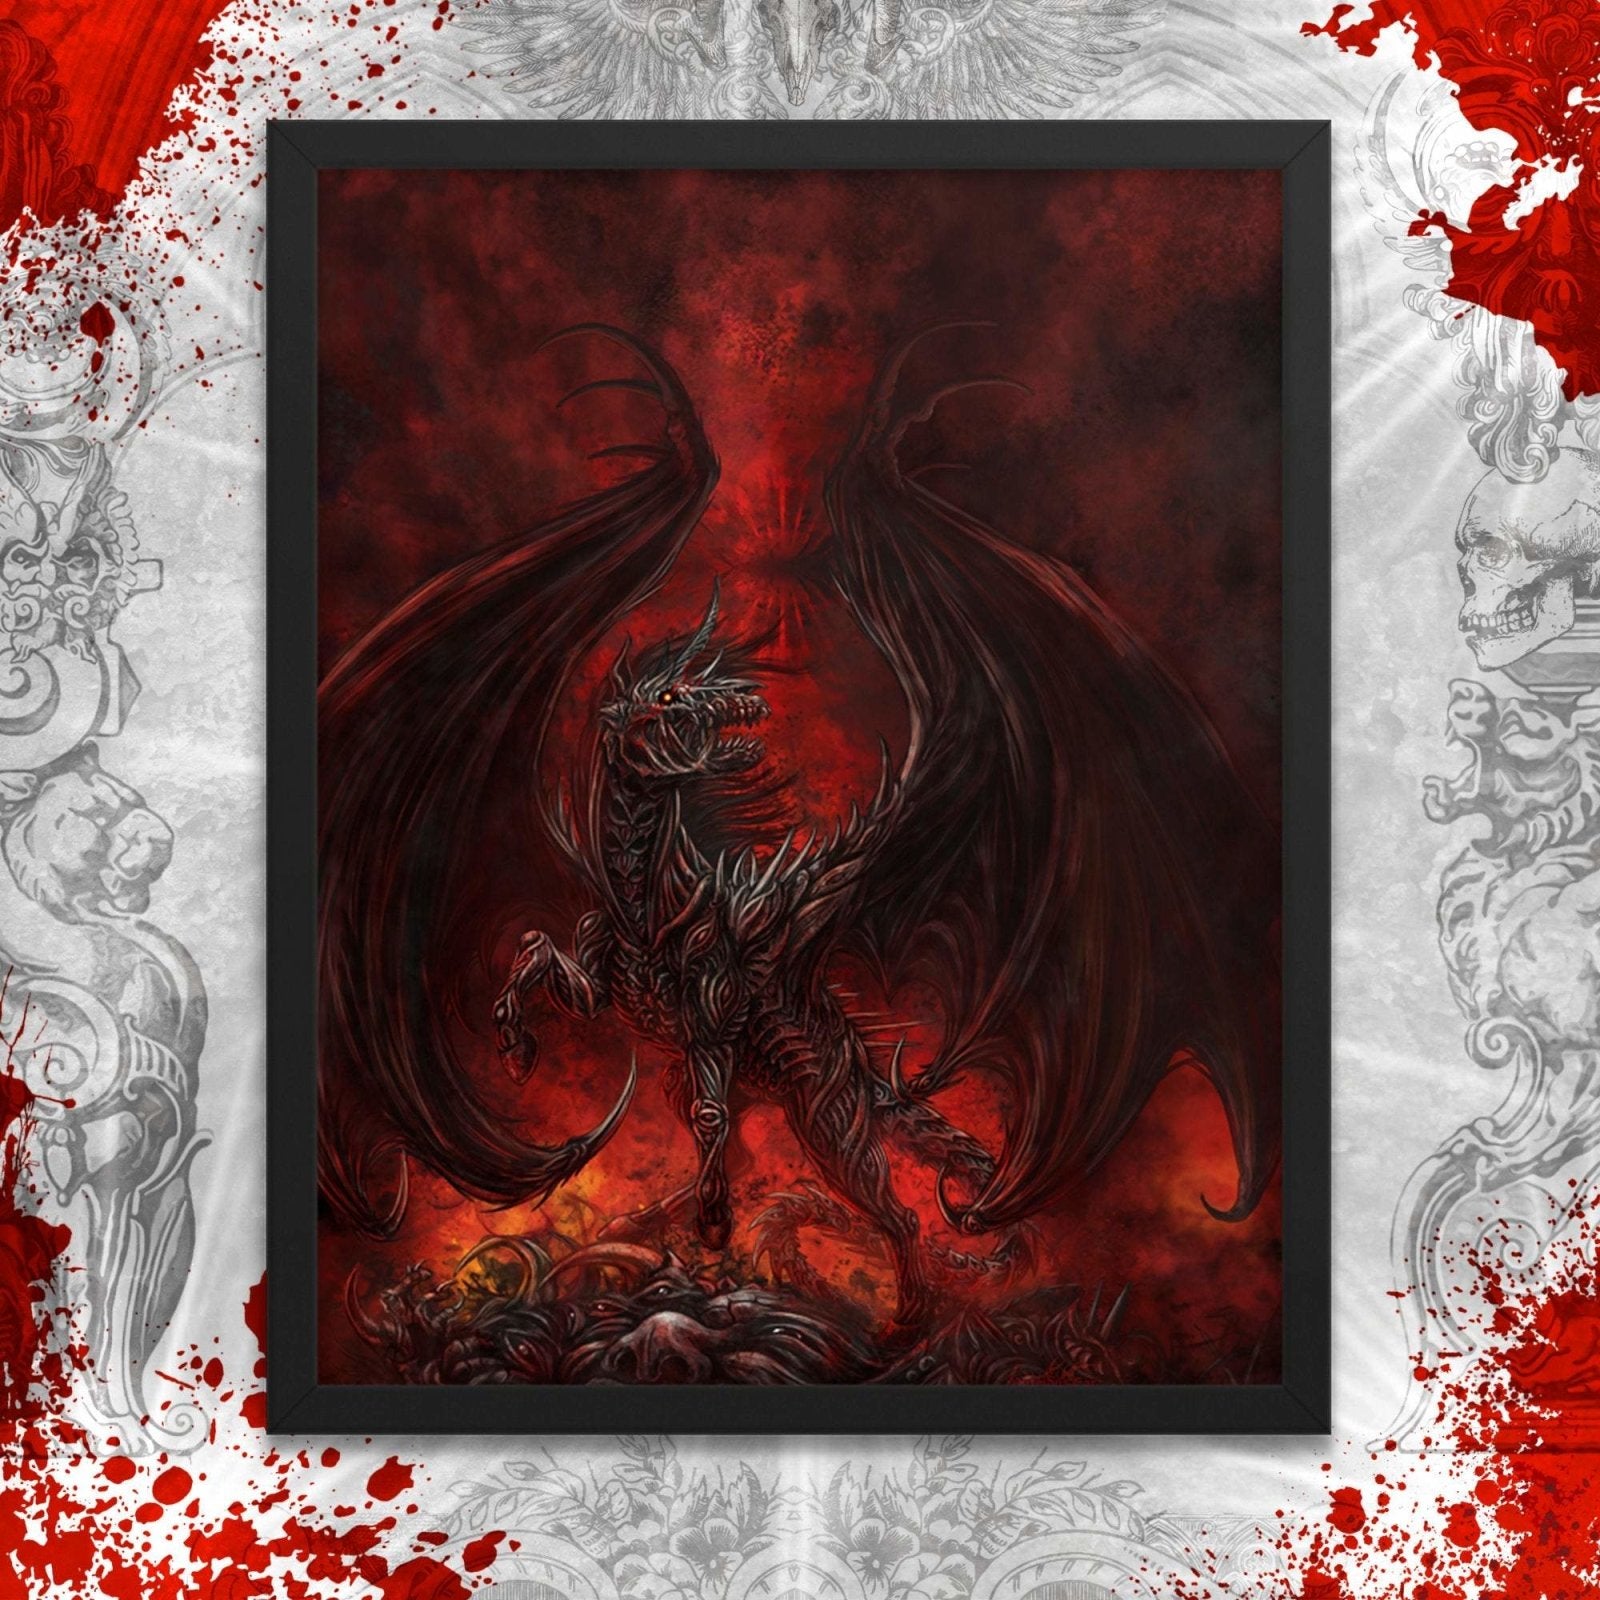 Demon Horse Poster, Game Room Wall Art Print, Goth & Eclectic - Abysm Internal